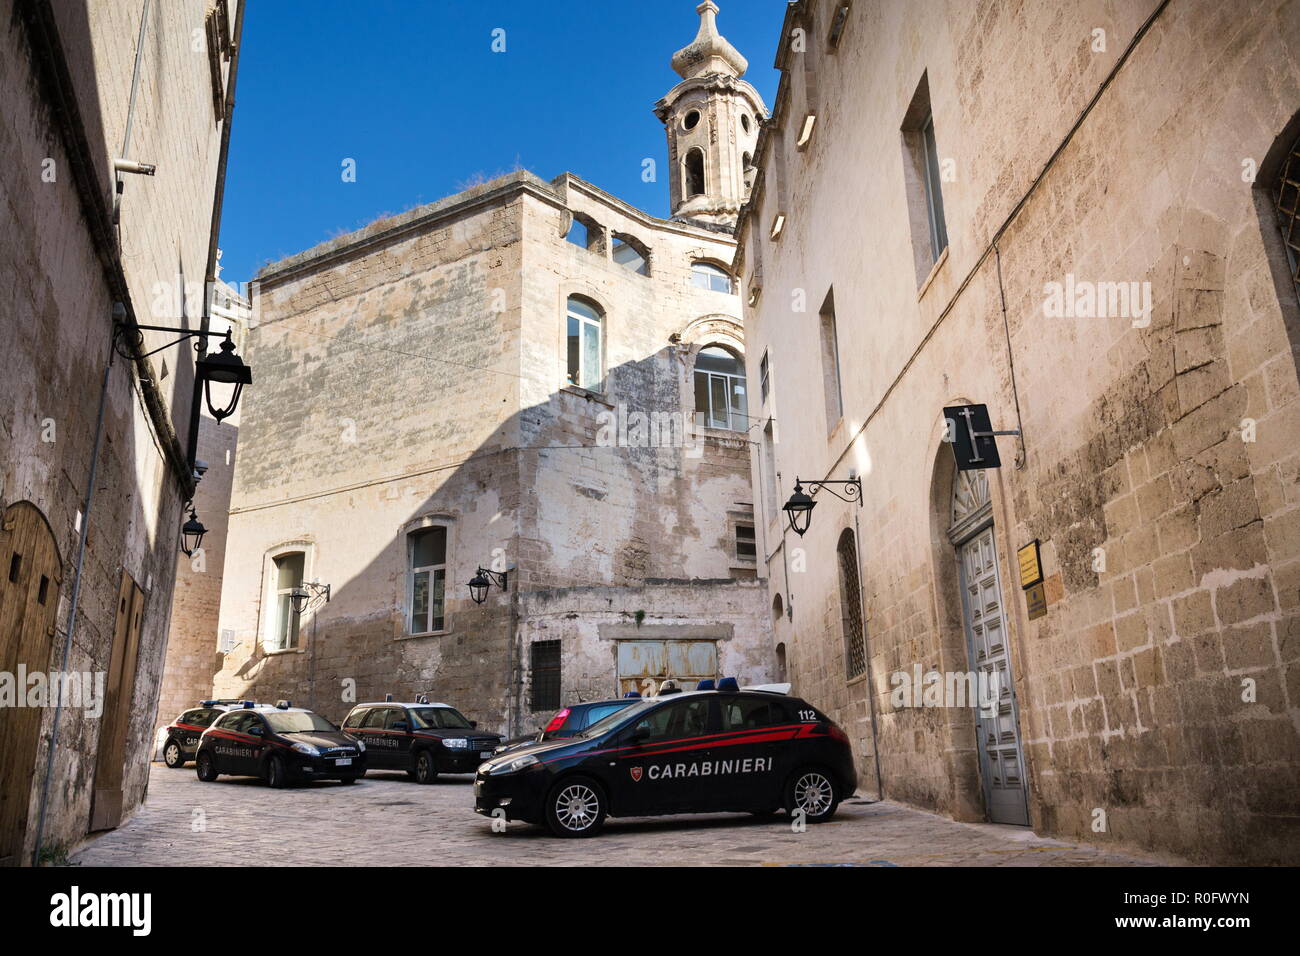 MONOPOLI, ITALY - JULY 4 2018: Carabinieri police cars stand in historical centre on July 4, 2018 in Monopoli, Italy. Stock Photo